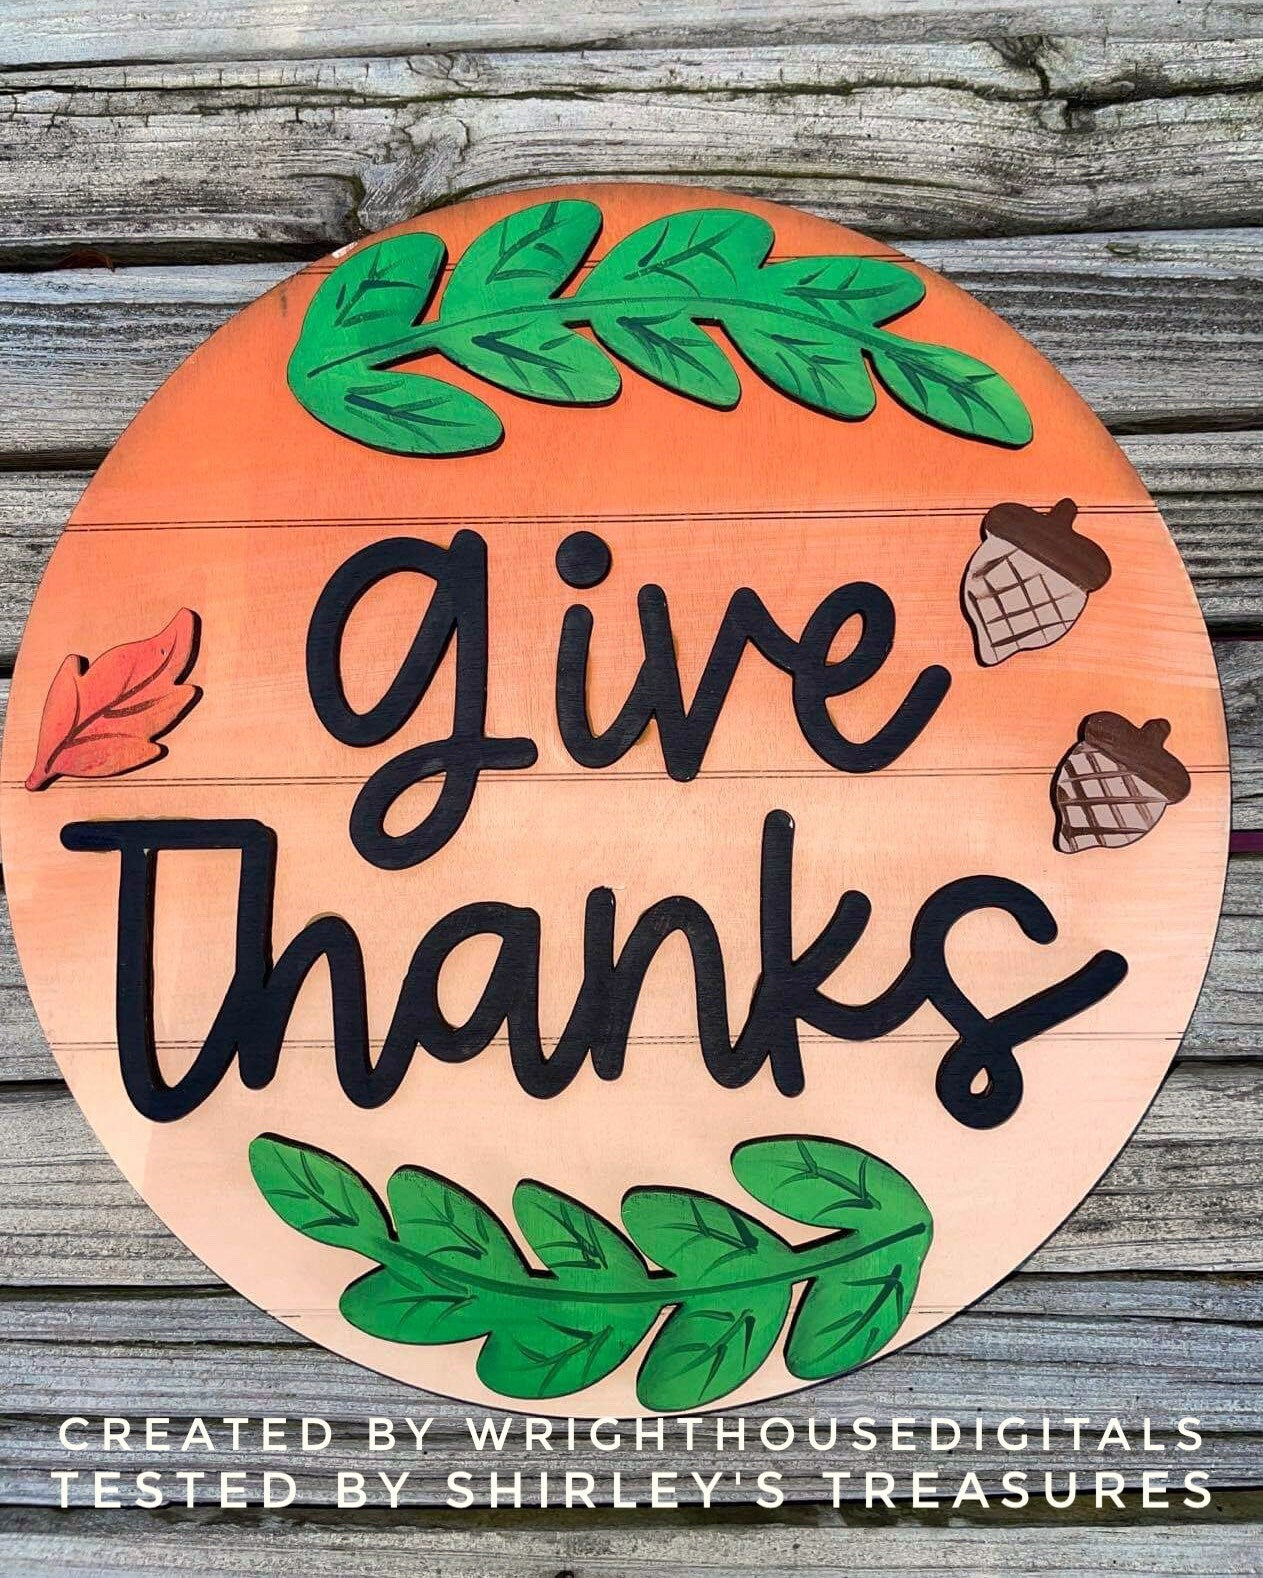 Give Thanks - Acorns and Greenery - Autumn Seasonal Round - Files for Sign Making - SVG Cut File For Glowforge - Digital File